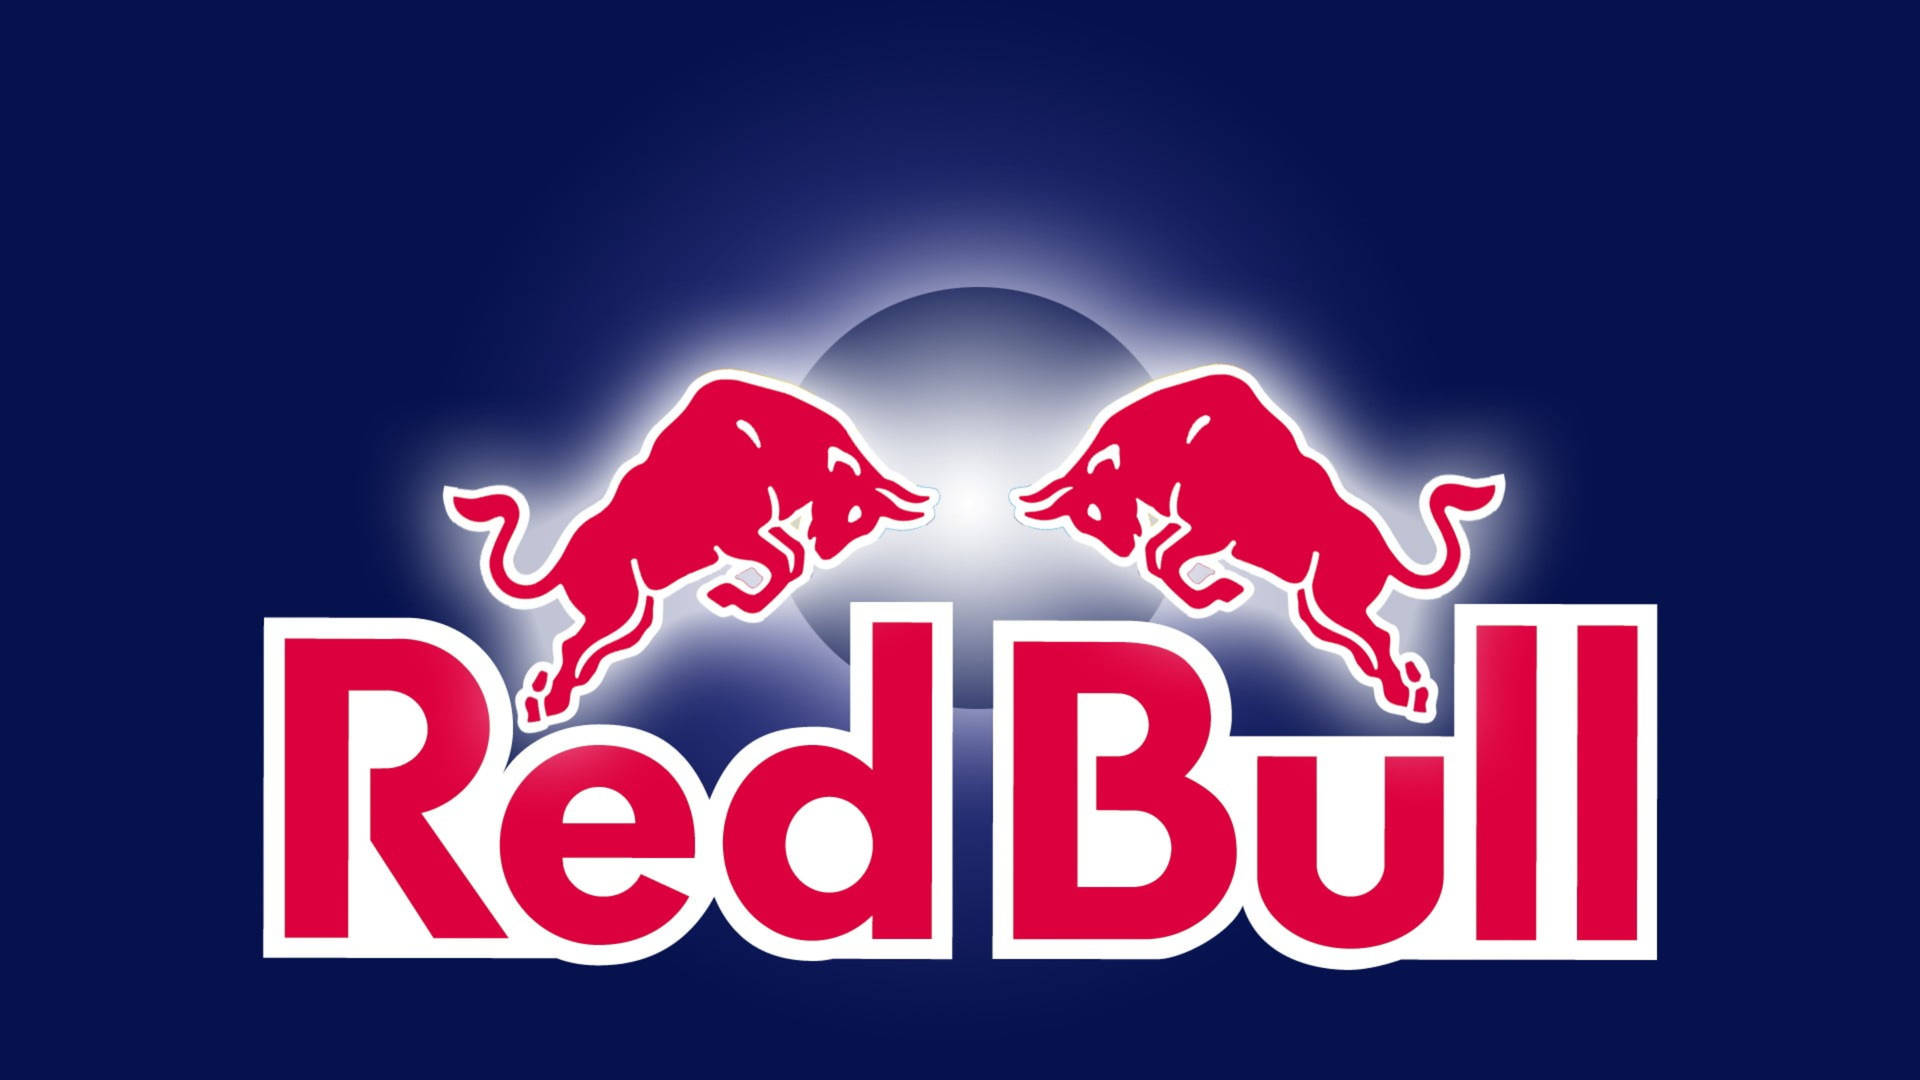 Oracle Red Bull Racing Logo: A Symbol Of Speed And Power